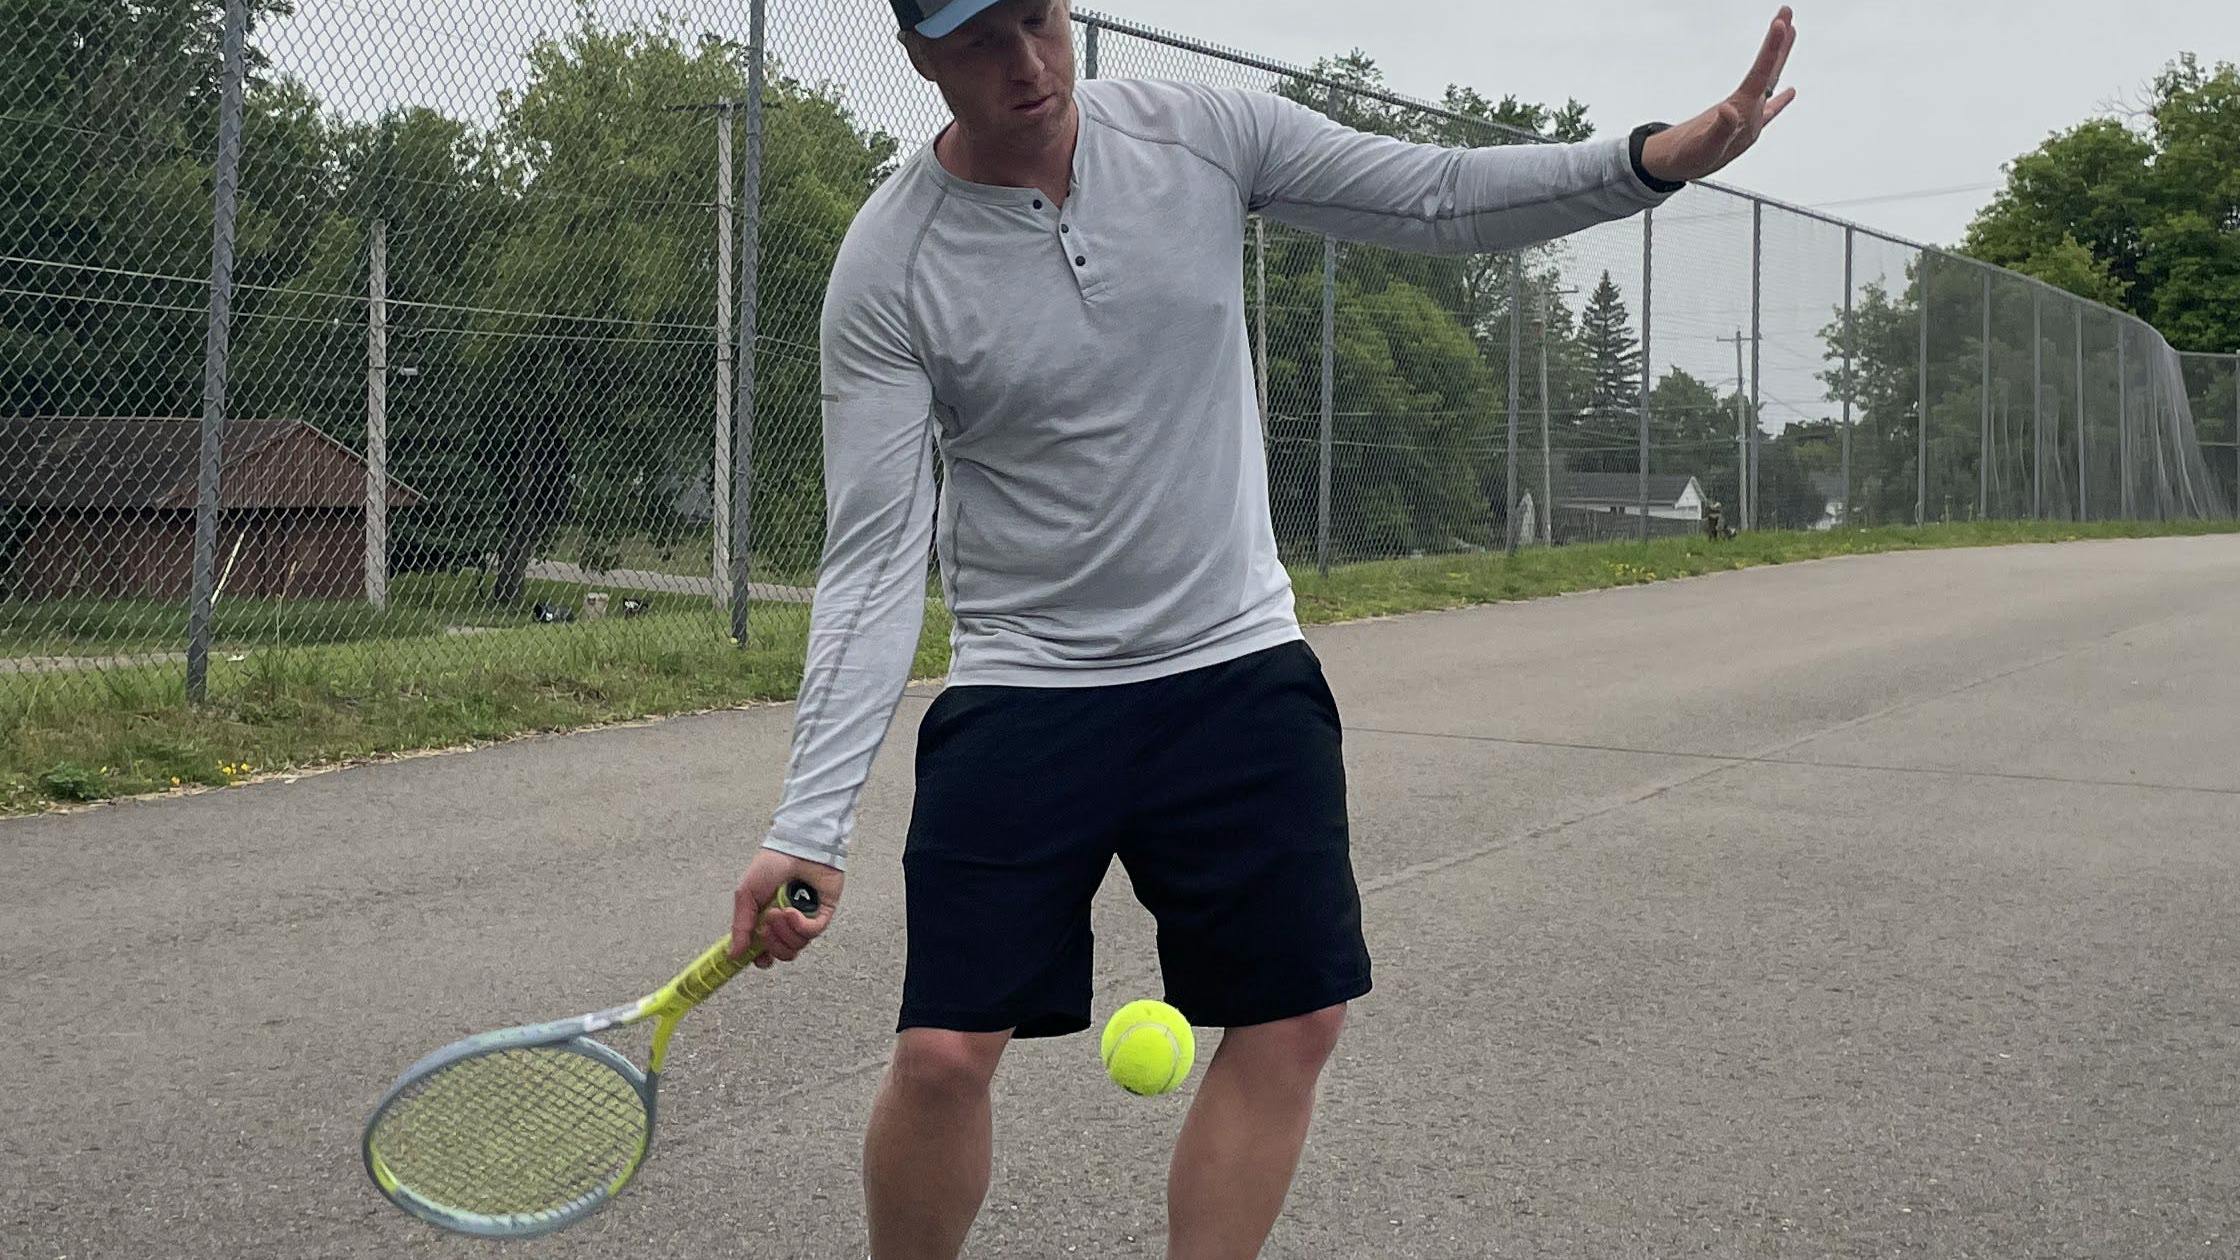 A tennis player takes a swing at a tennis ball with the Head Graphene 360+ Extreme MP Racquet.